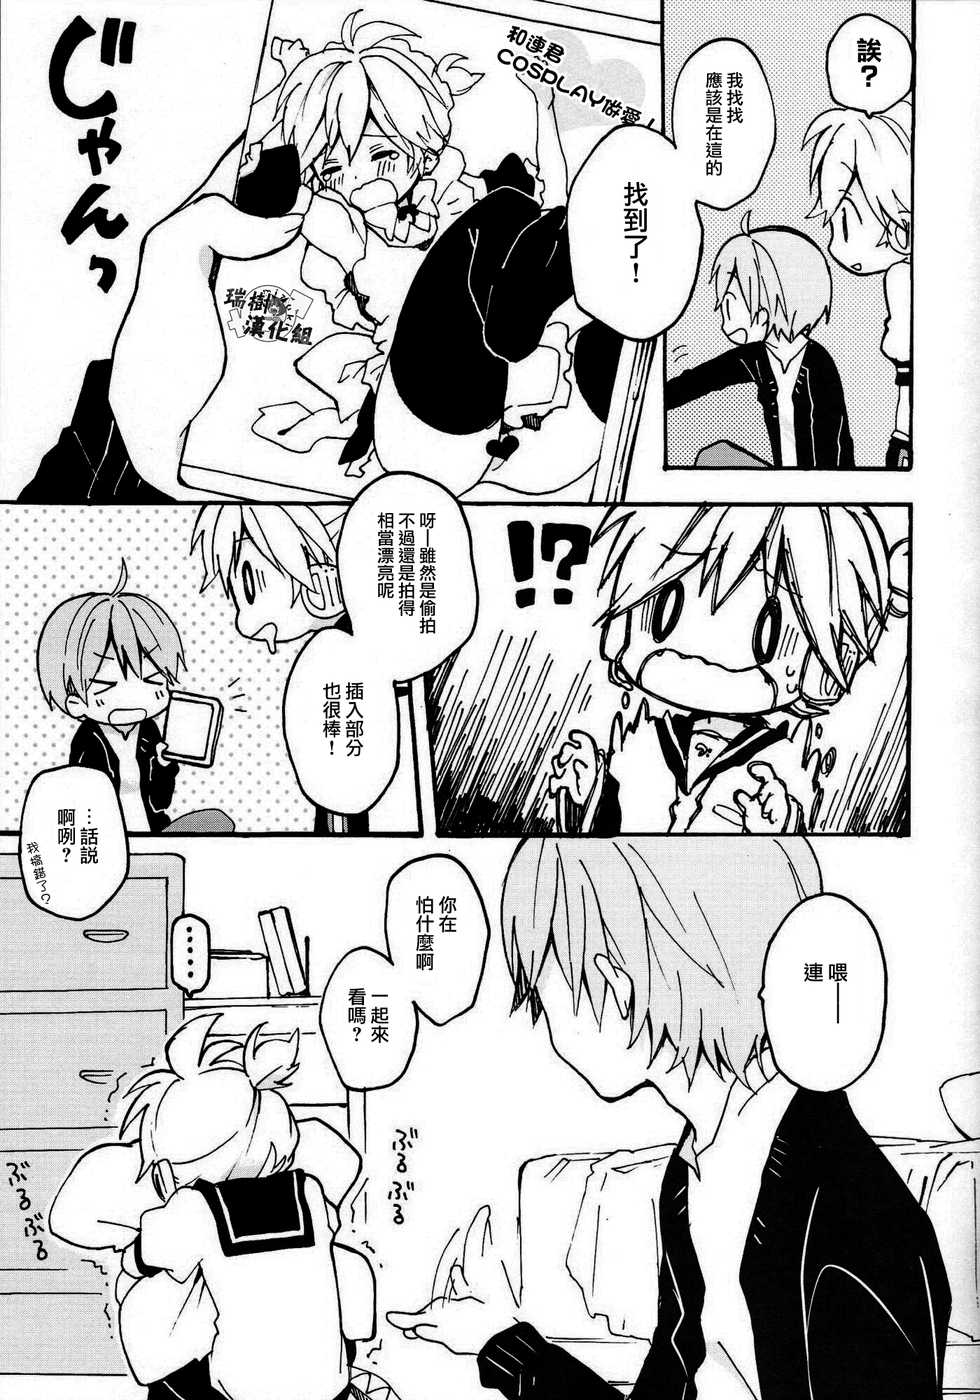 [Hey You! (Non)] Len-kun to Asobou! (VOCALOID) [Chinese] [瑞树汉化组] - Page 40